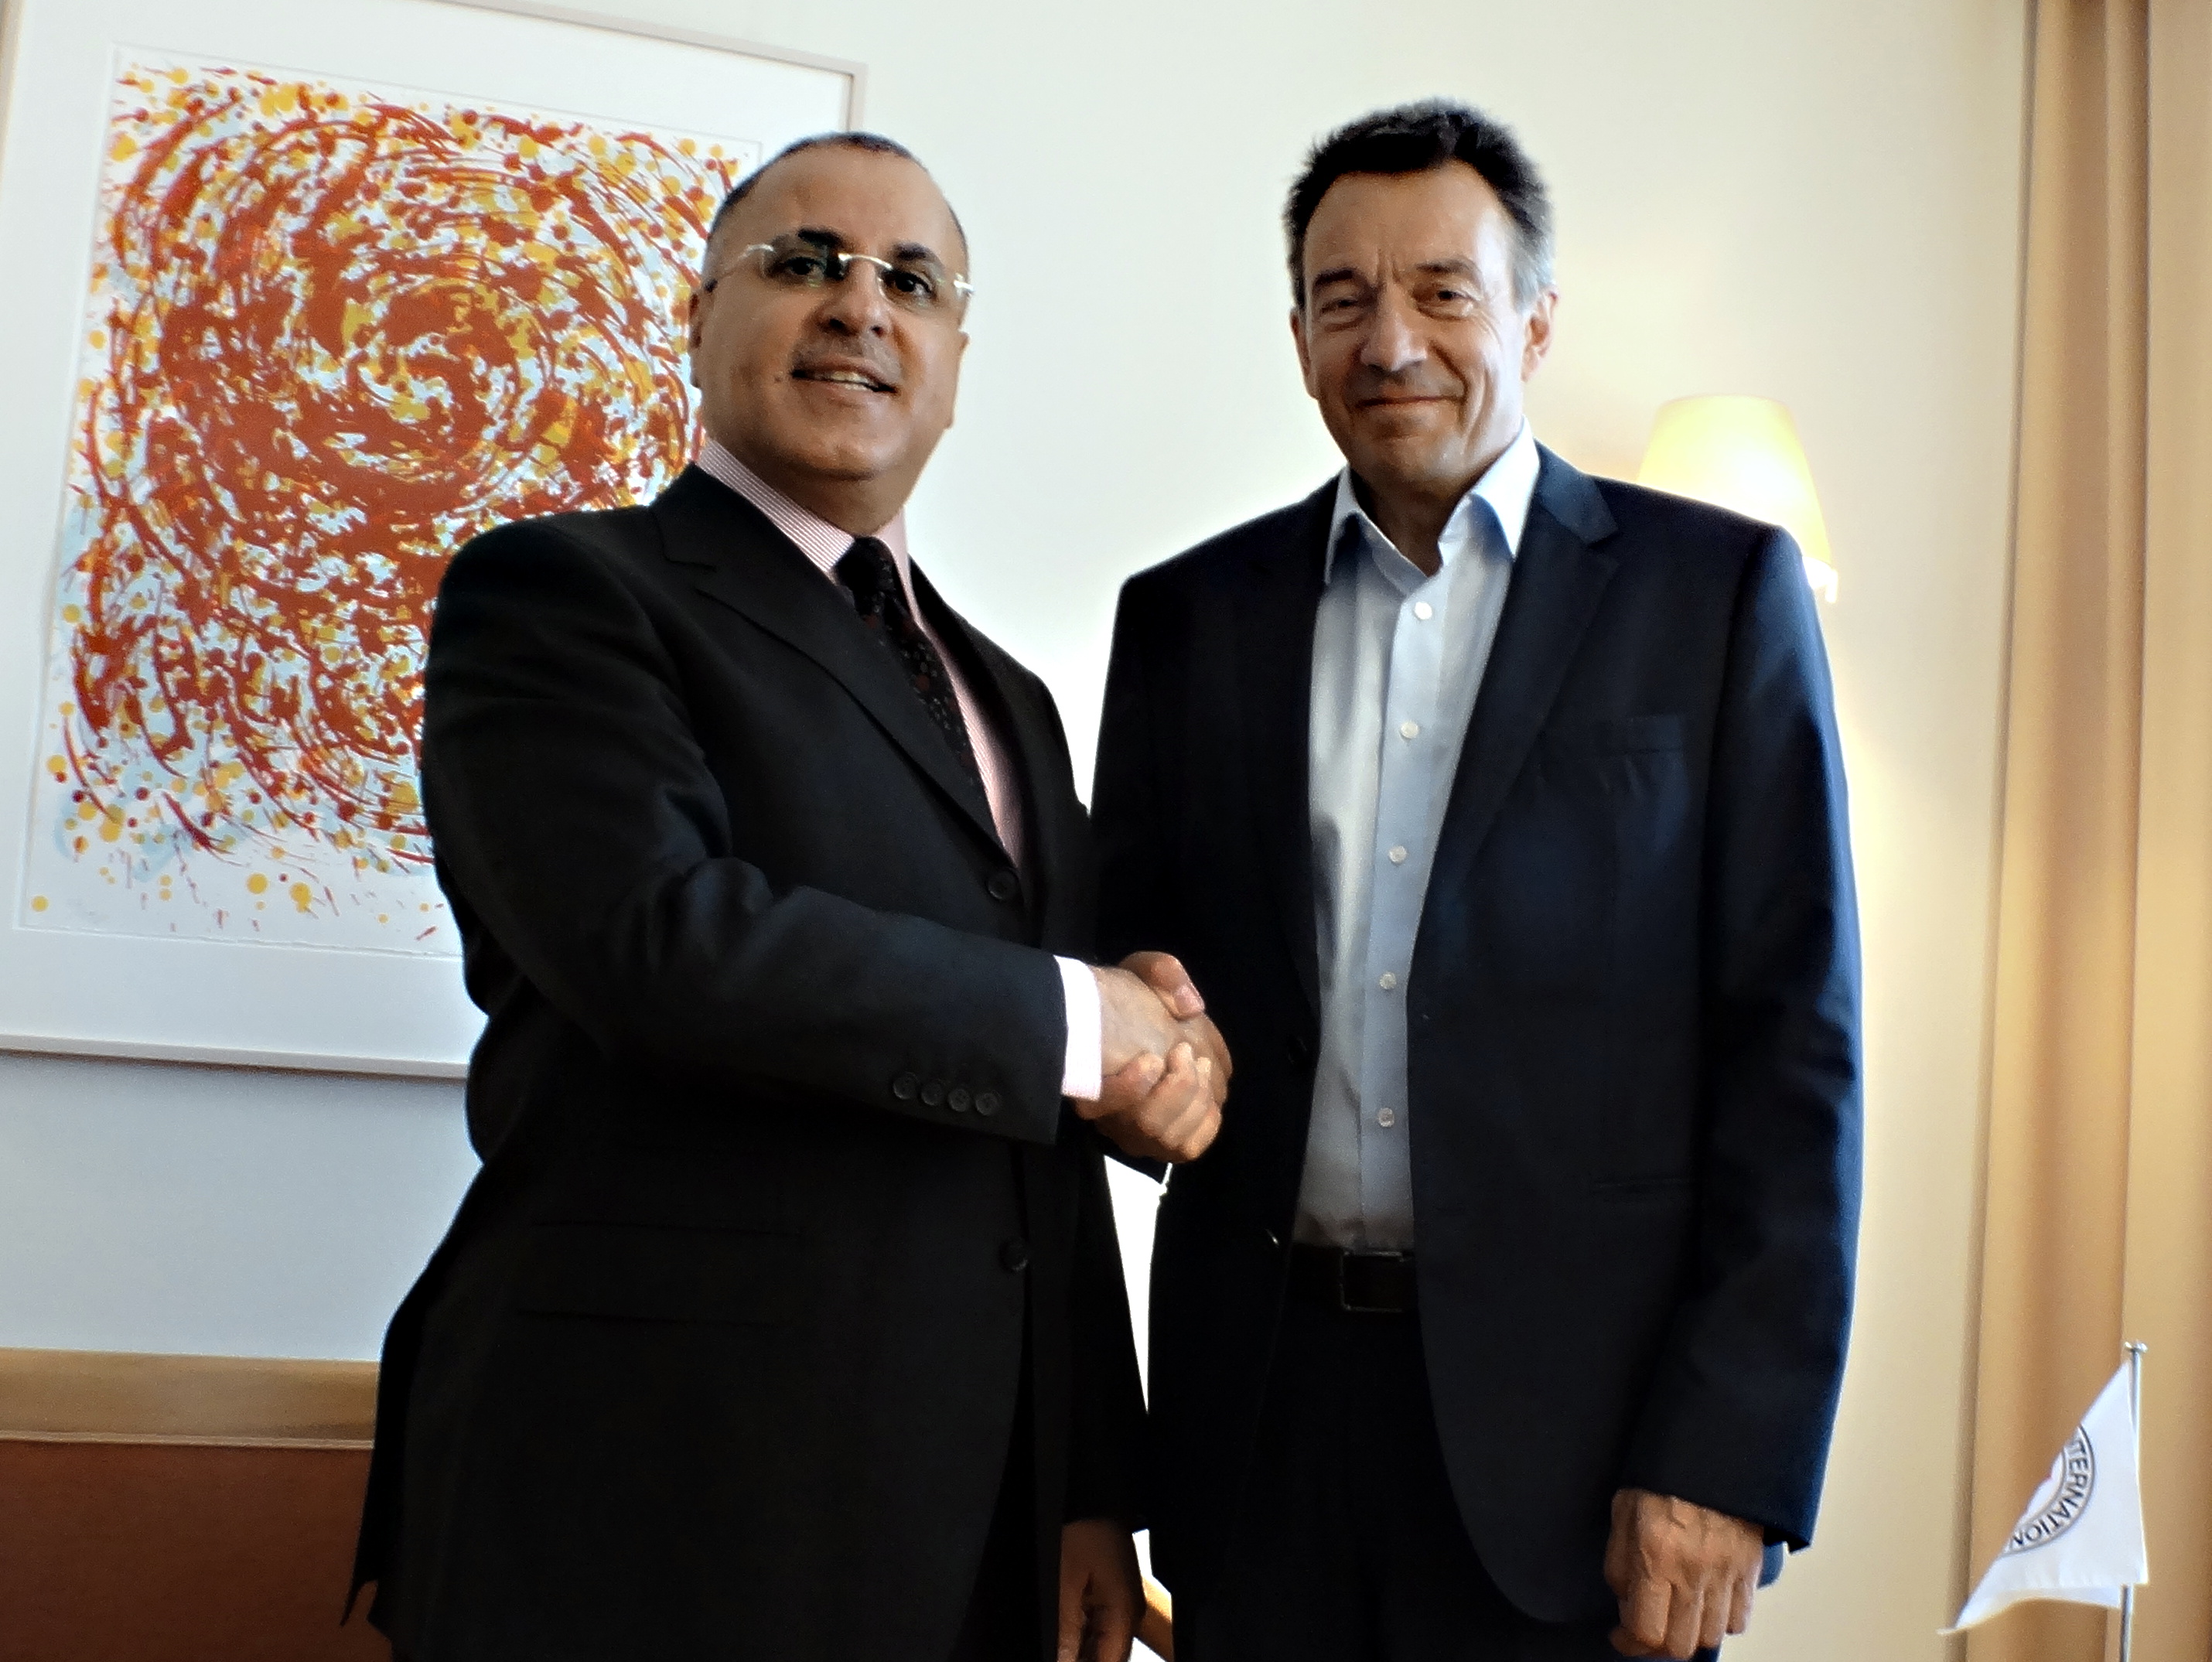 President of the (ICRC) Peter Maurer meets with Kuwait's Permanent Representative to UN and International Organizations headquarters in Geneva Jamal Al-Ghunaim